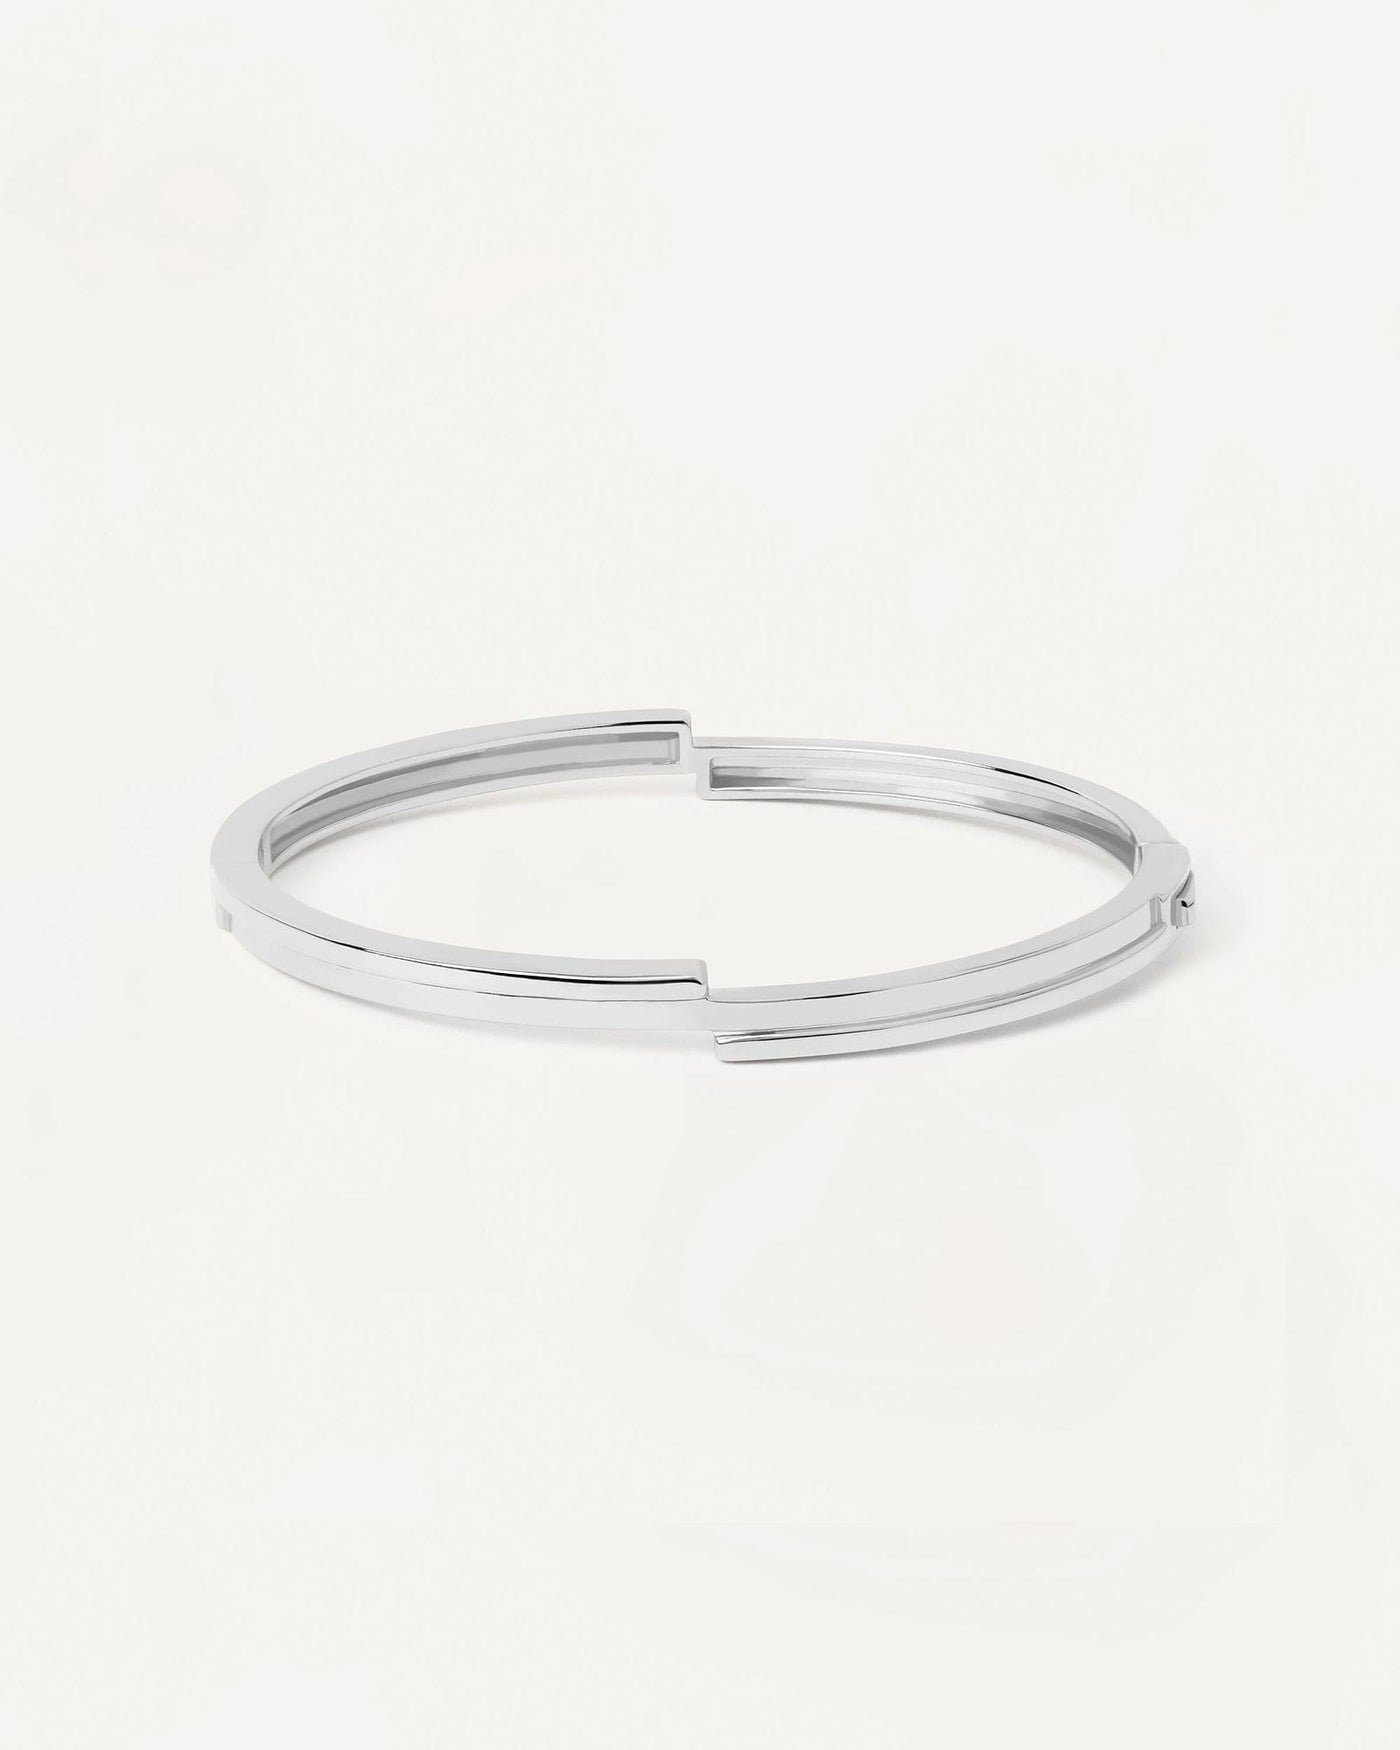 2024 Selection | Genesis Silver Bangle. Hinged rigid bracelet with asymetric design in Sterling silver. Get the latest arrival from PDPAOLA. Place your order safely and get this Best Seller. Free Shipping.